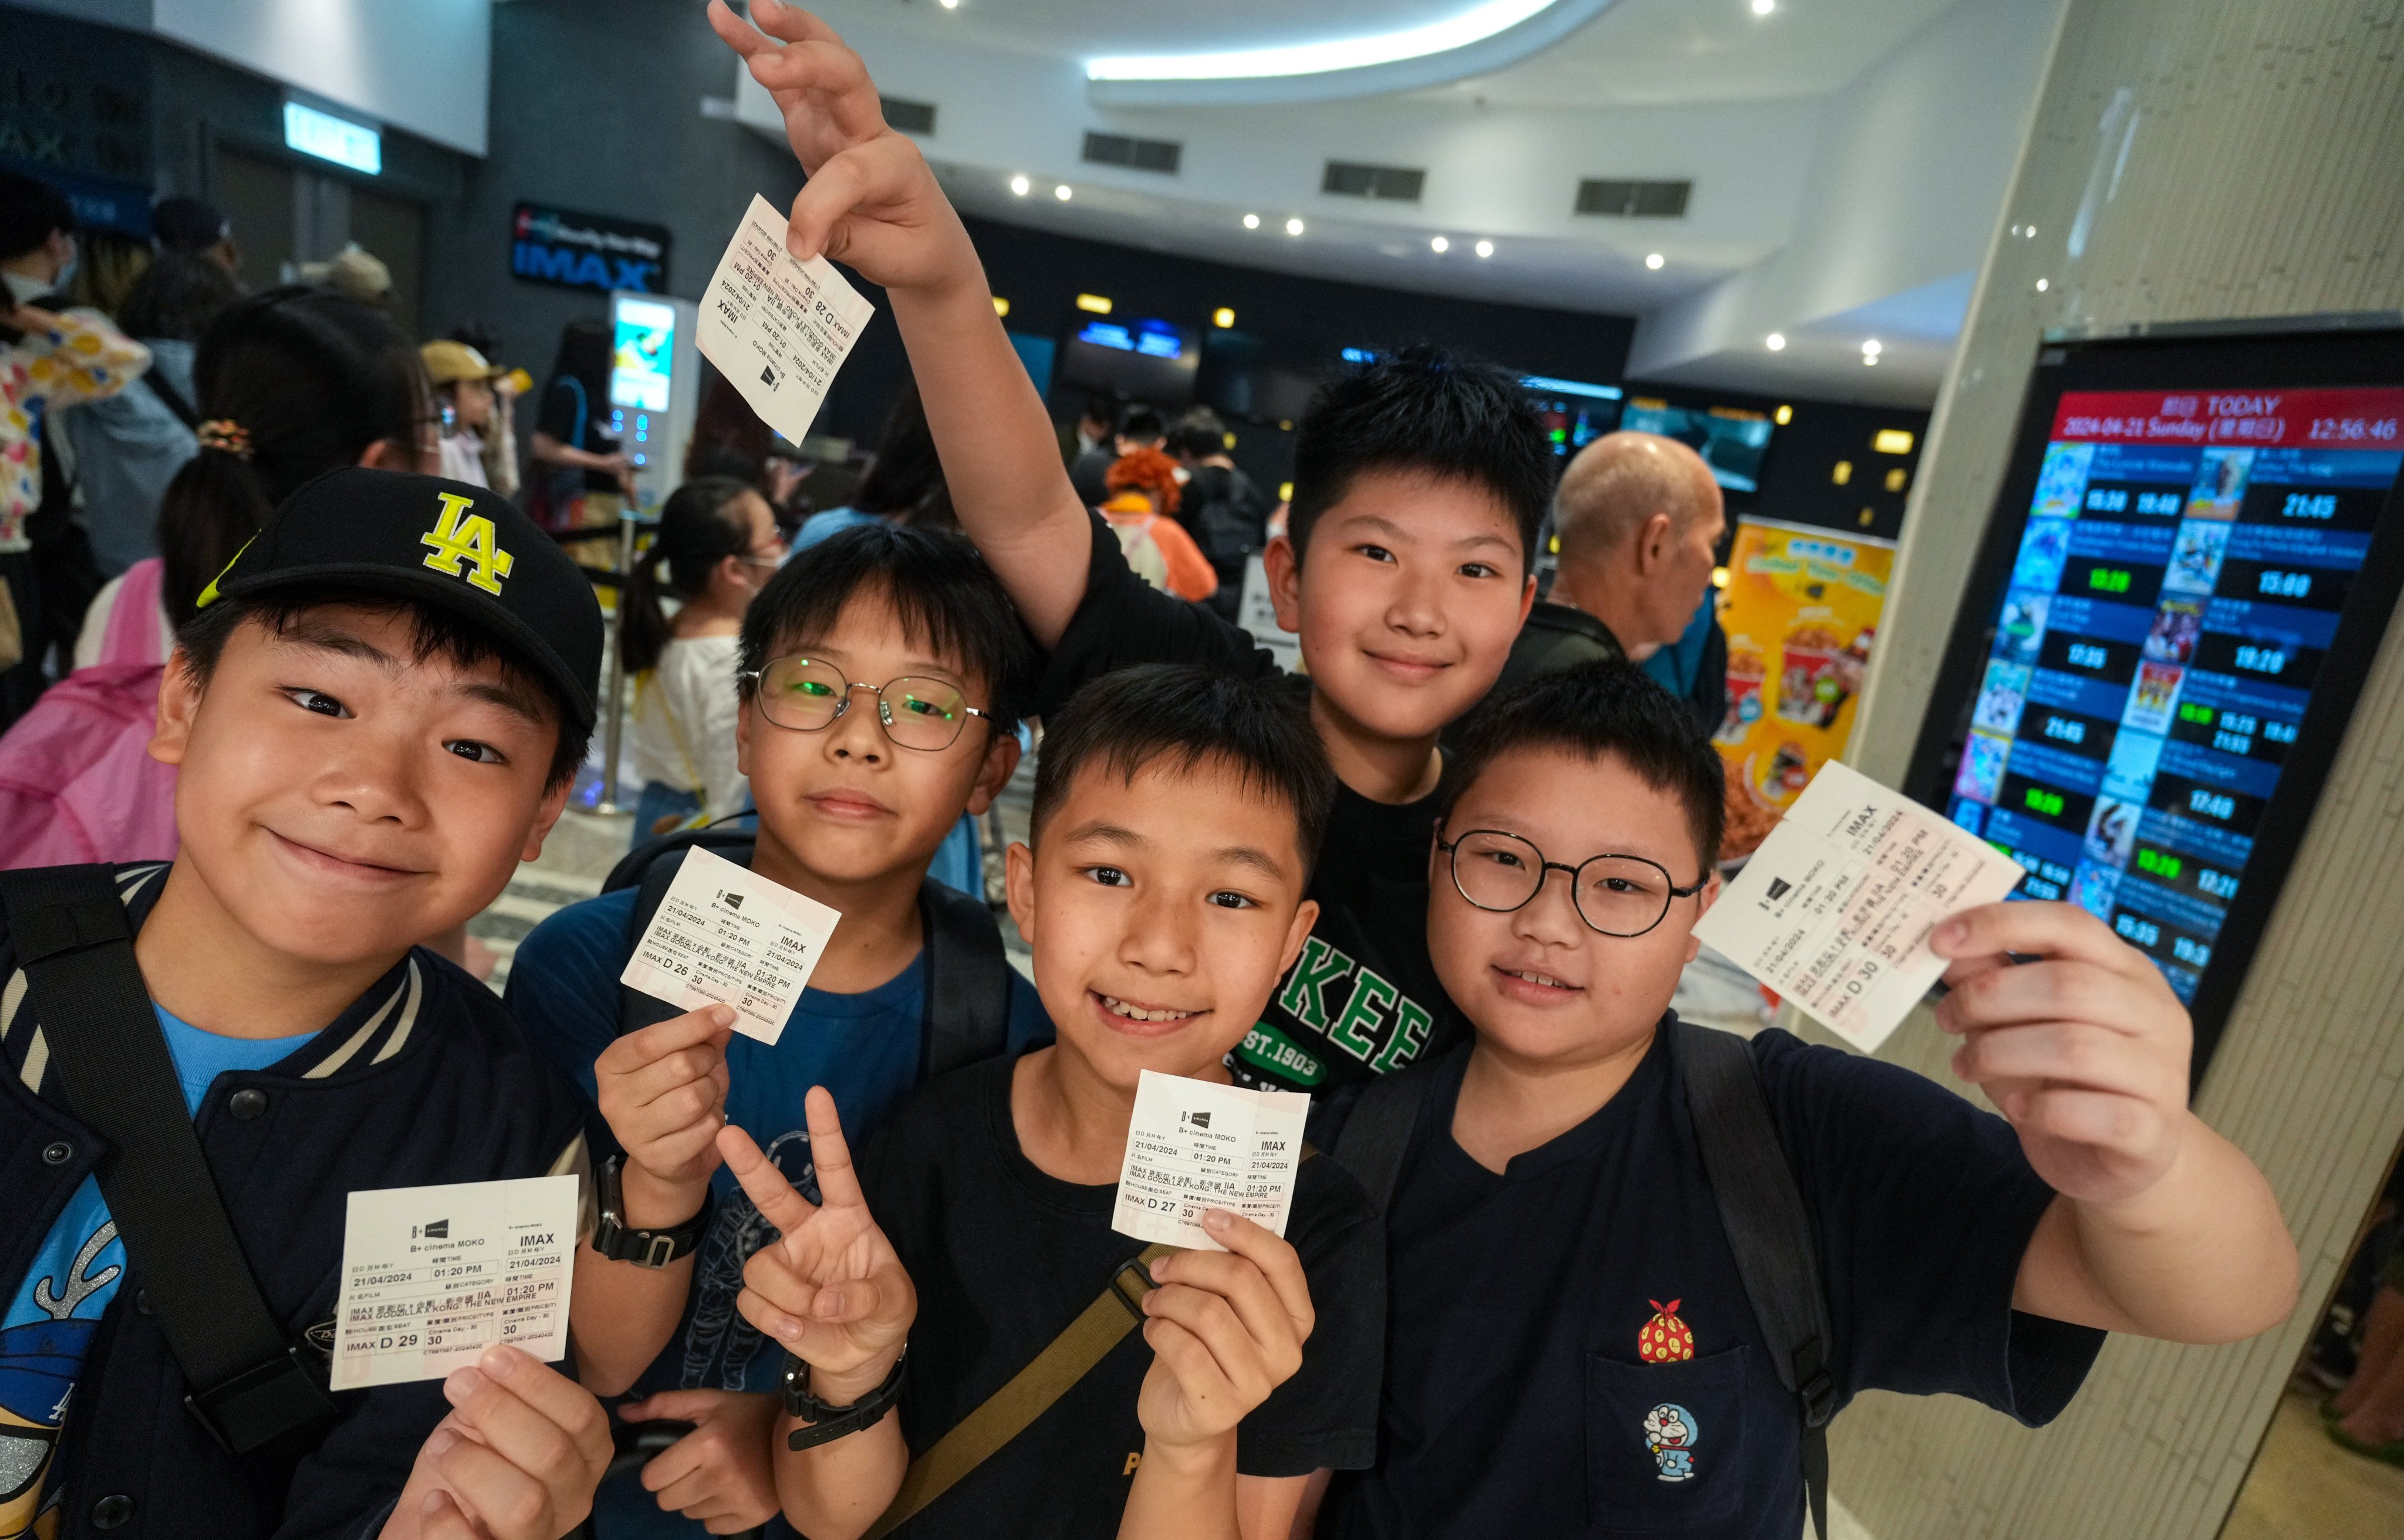 Happy young film fans show off their cut-price cinema tickets on Cinema Day. Photo: Sam Tsang